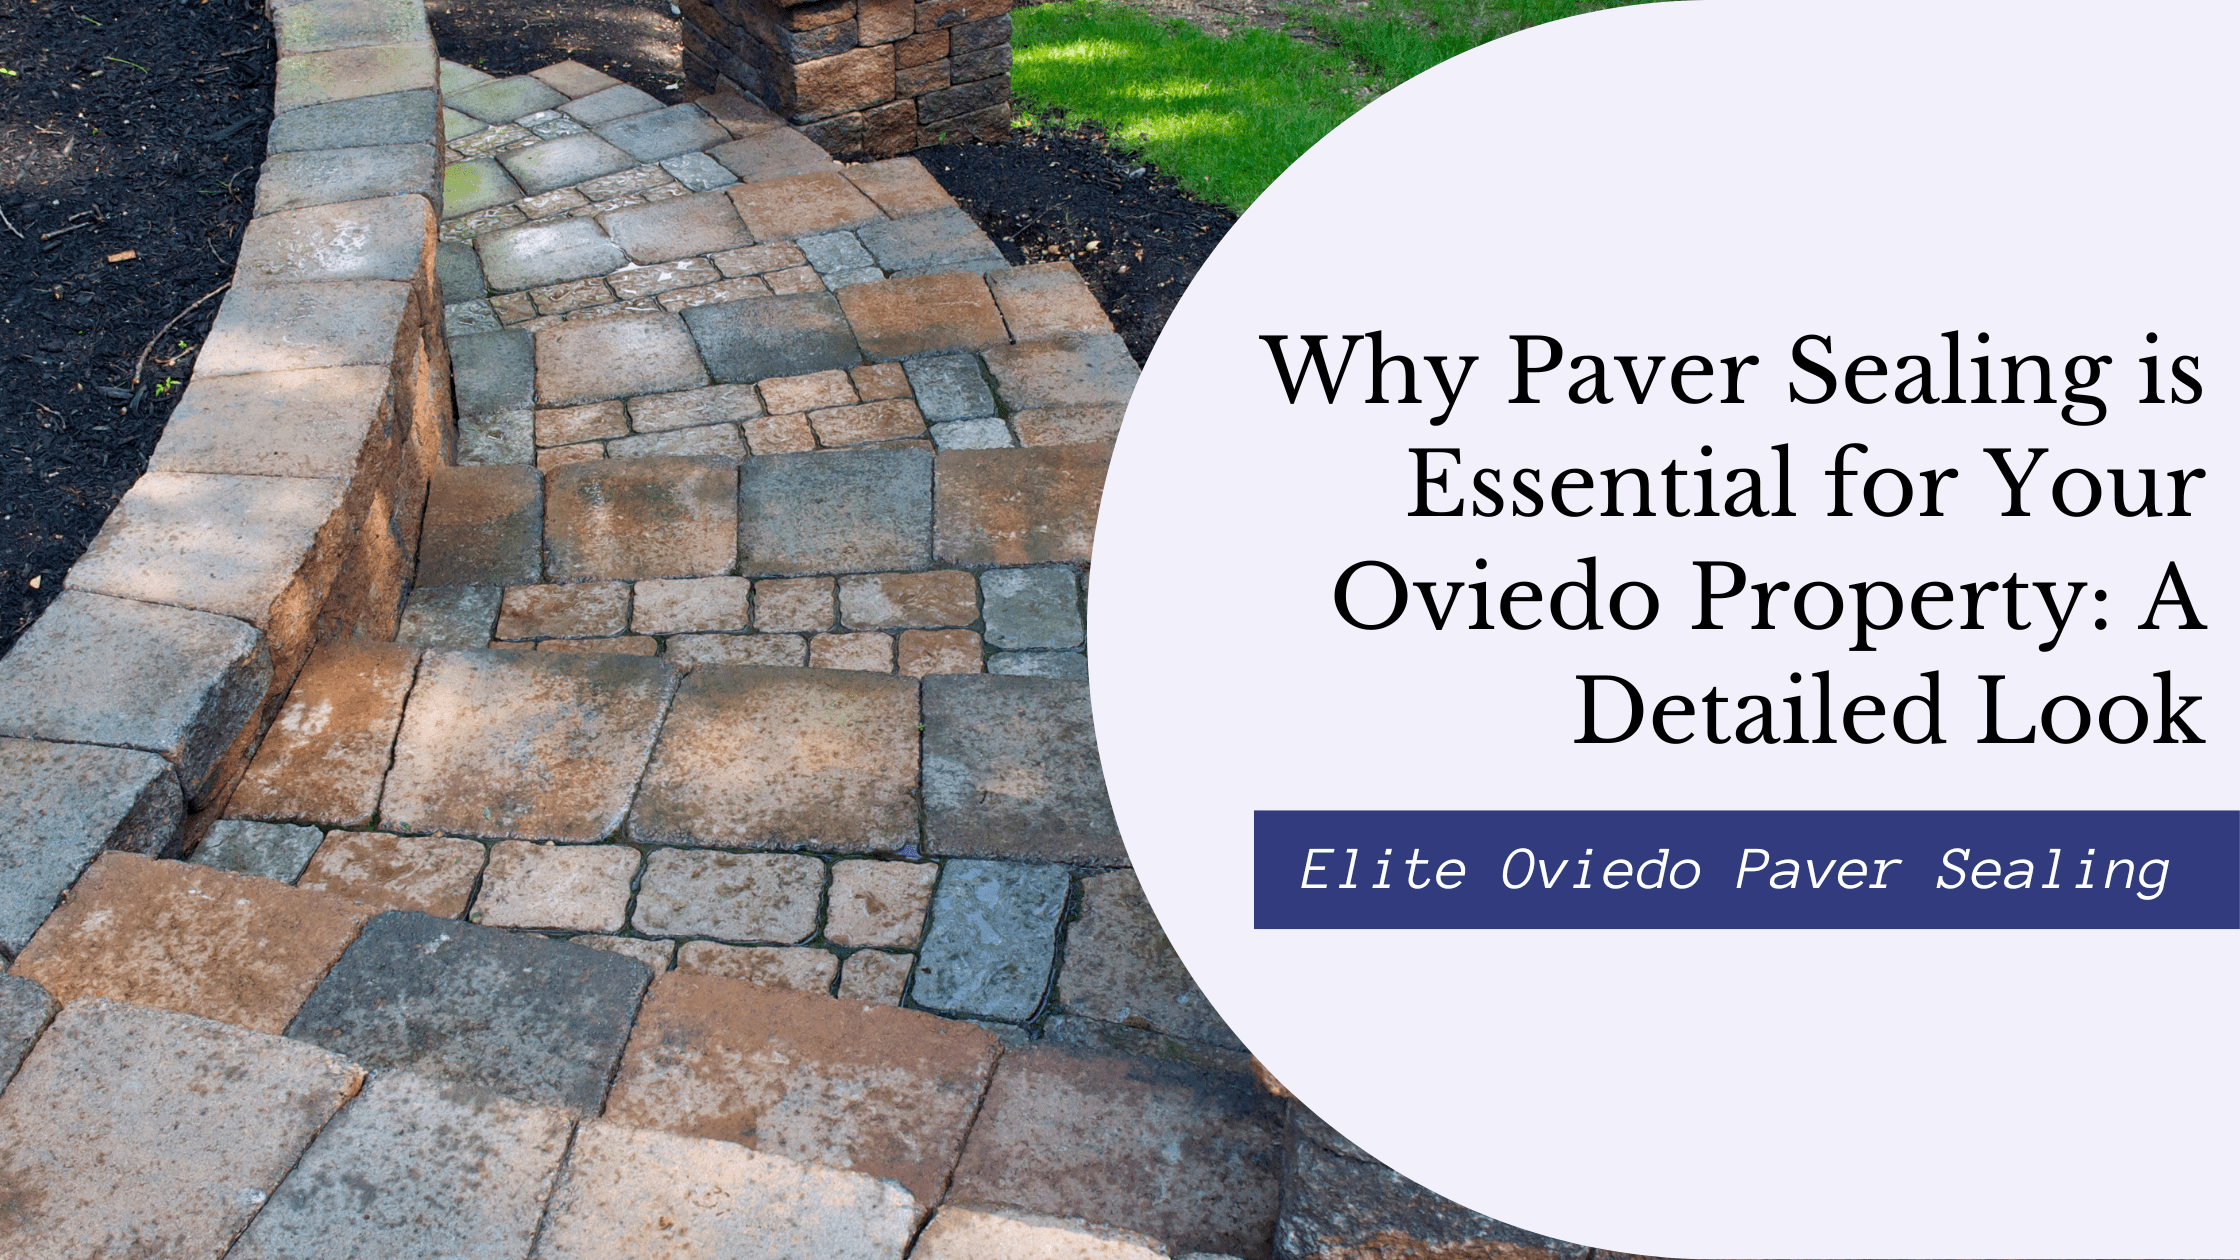 Why Paver Sealing is Essential for Your Oviedo Property A Detailed Look